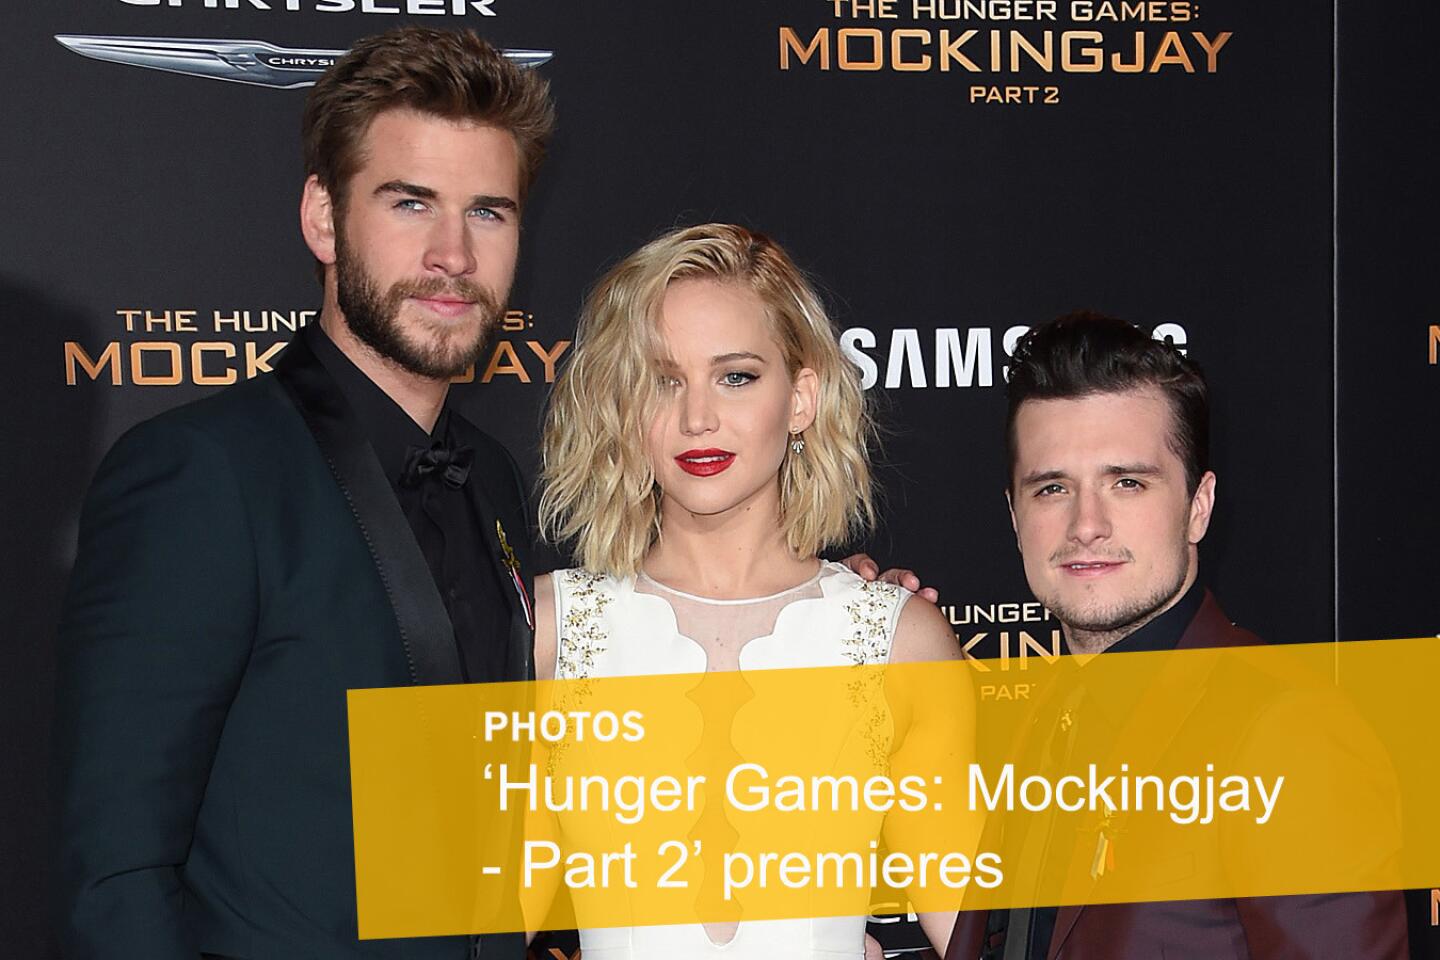 The Hunger Games: Catching Fire' premieres draw stars, crowds